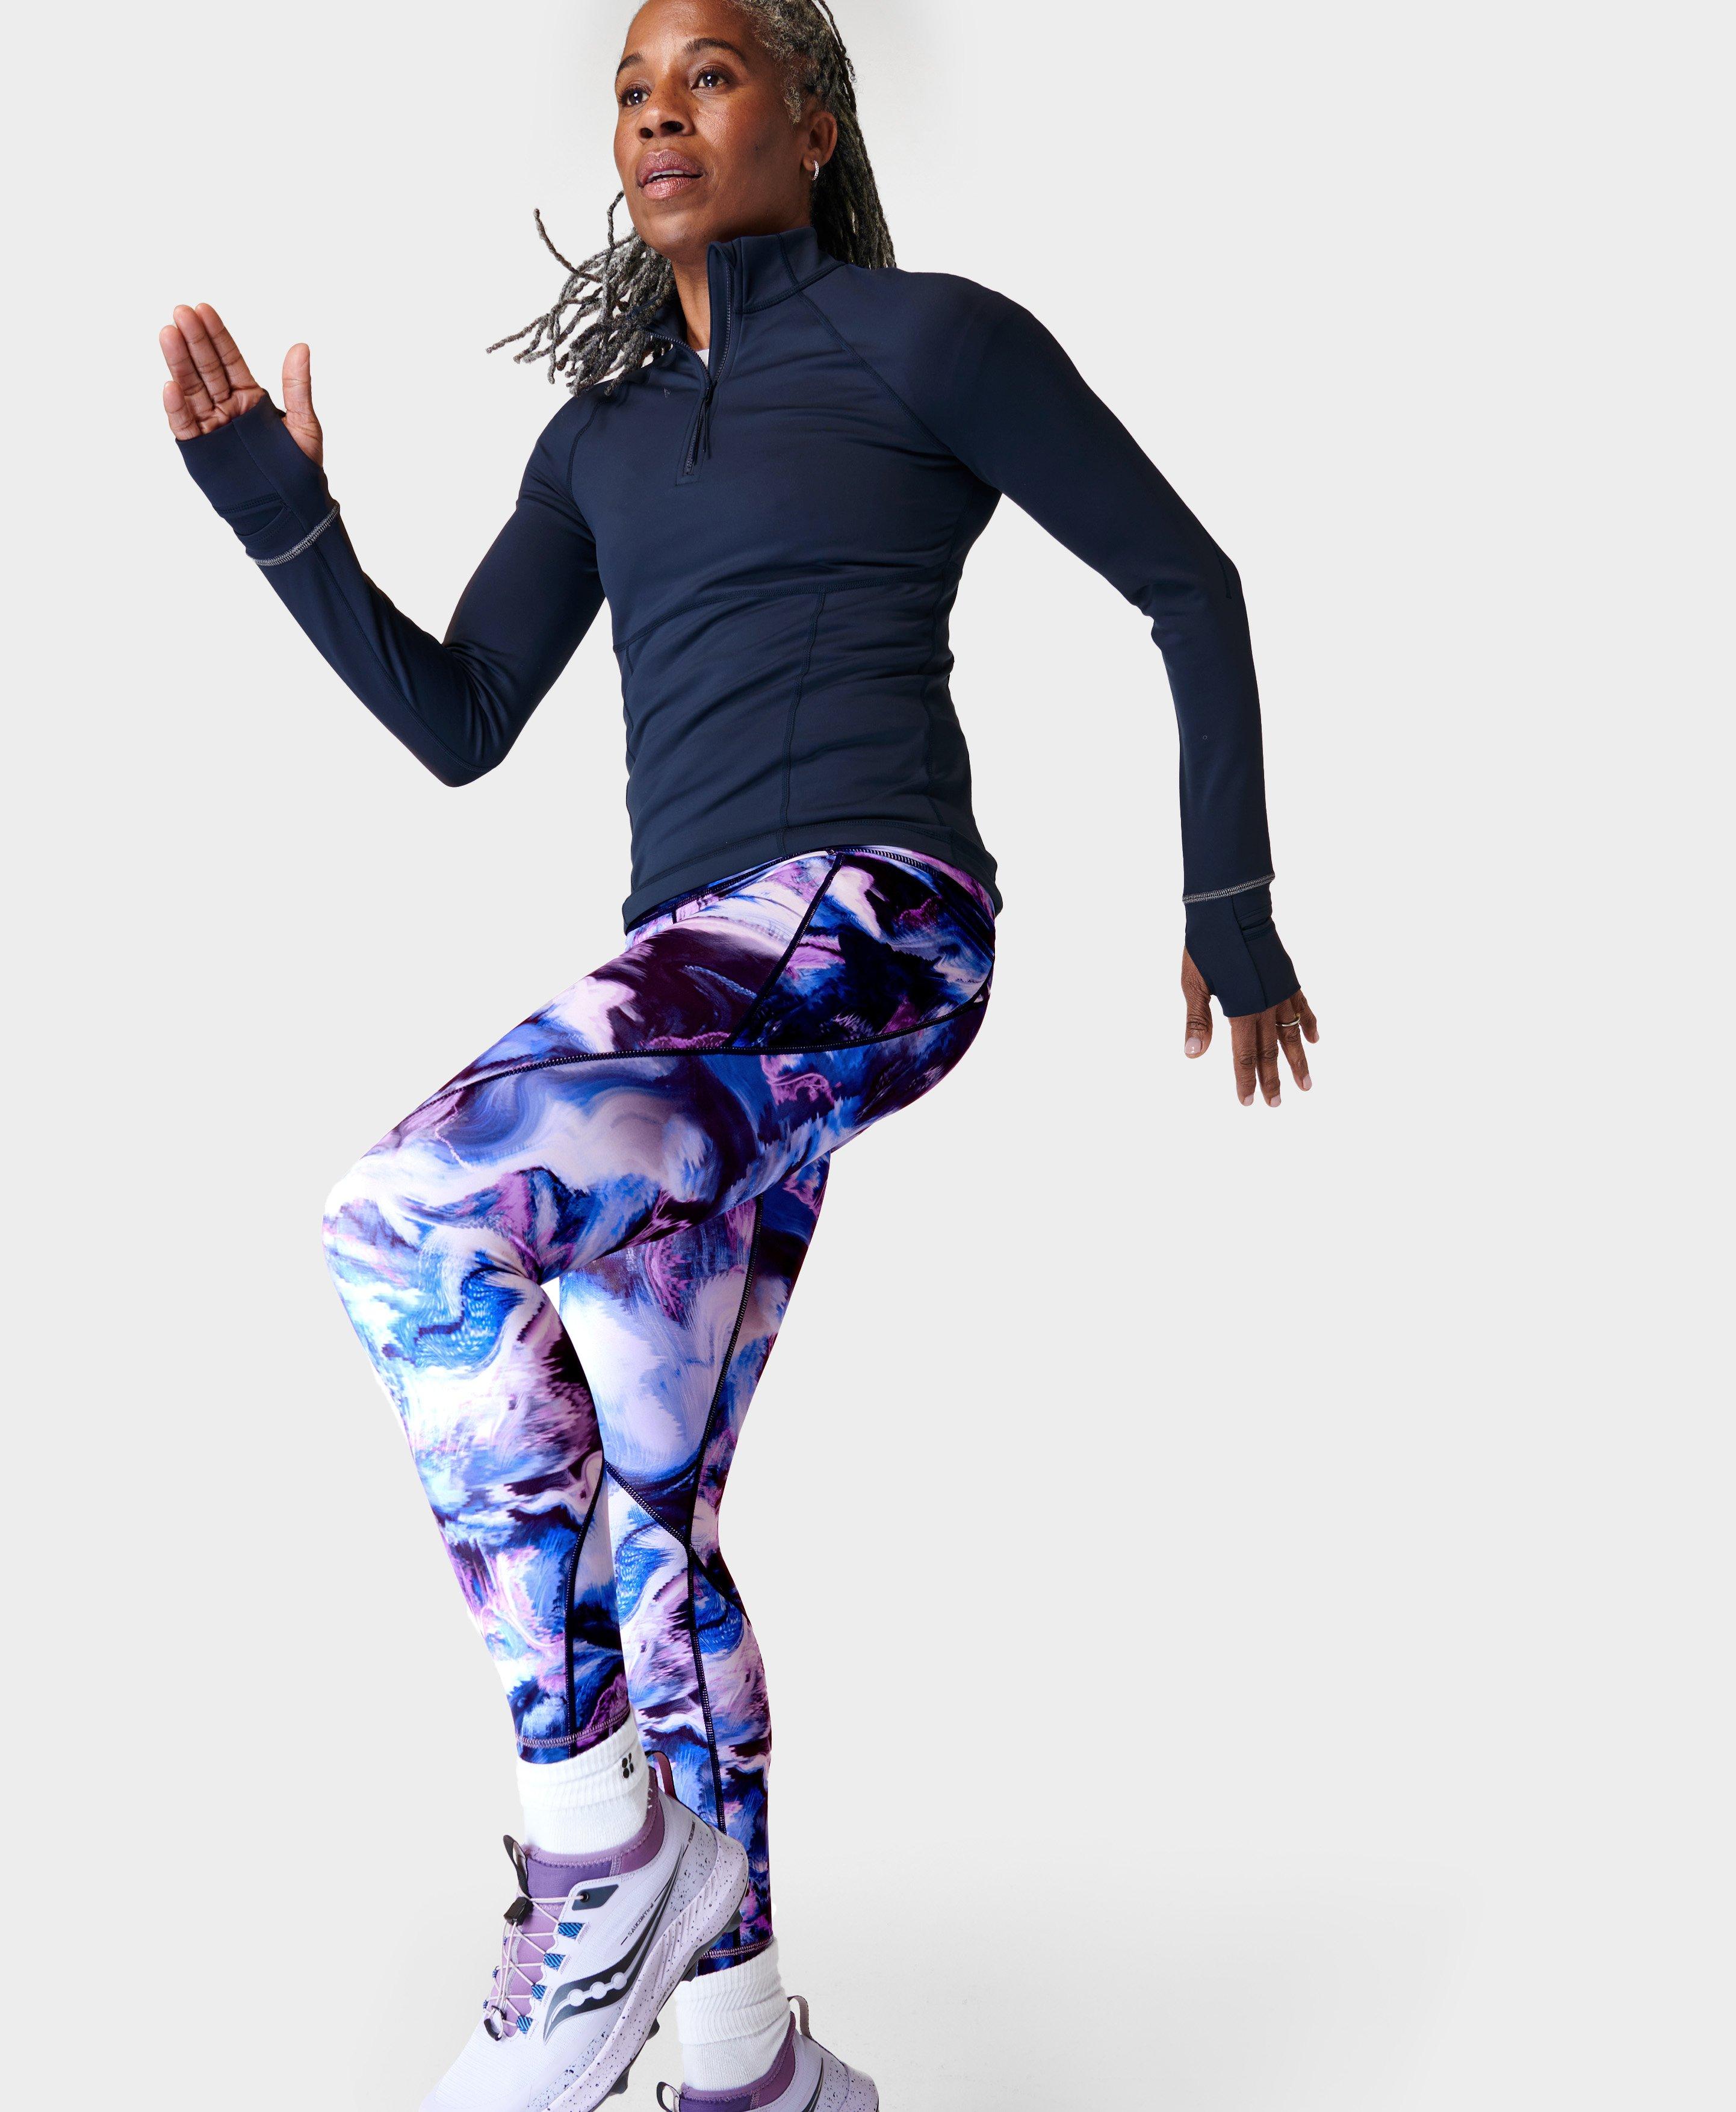 These Sweaty Betty leggings are the winter essential you never knew you  needed